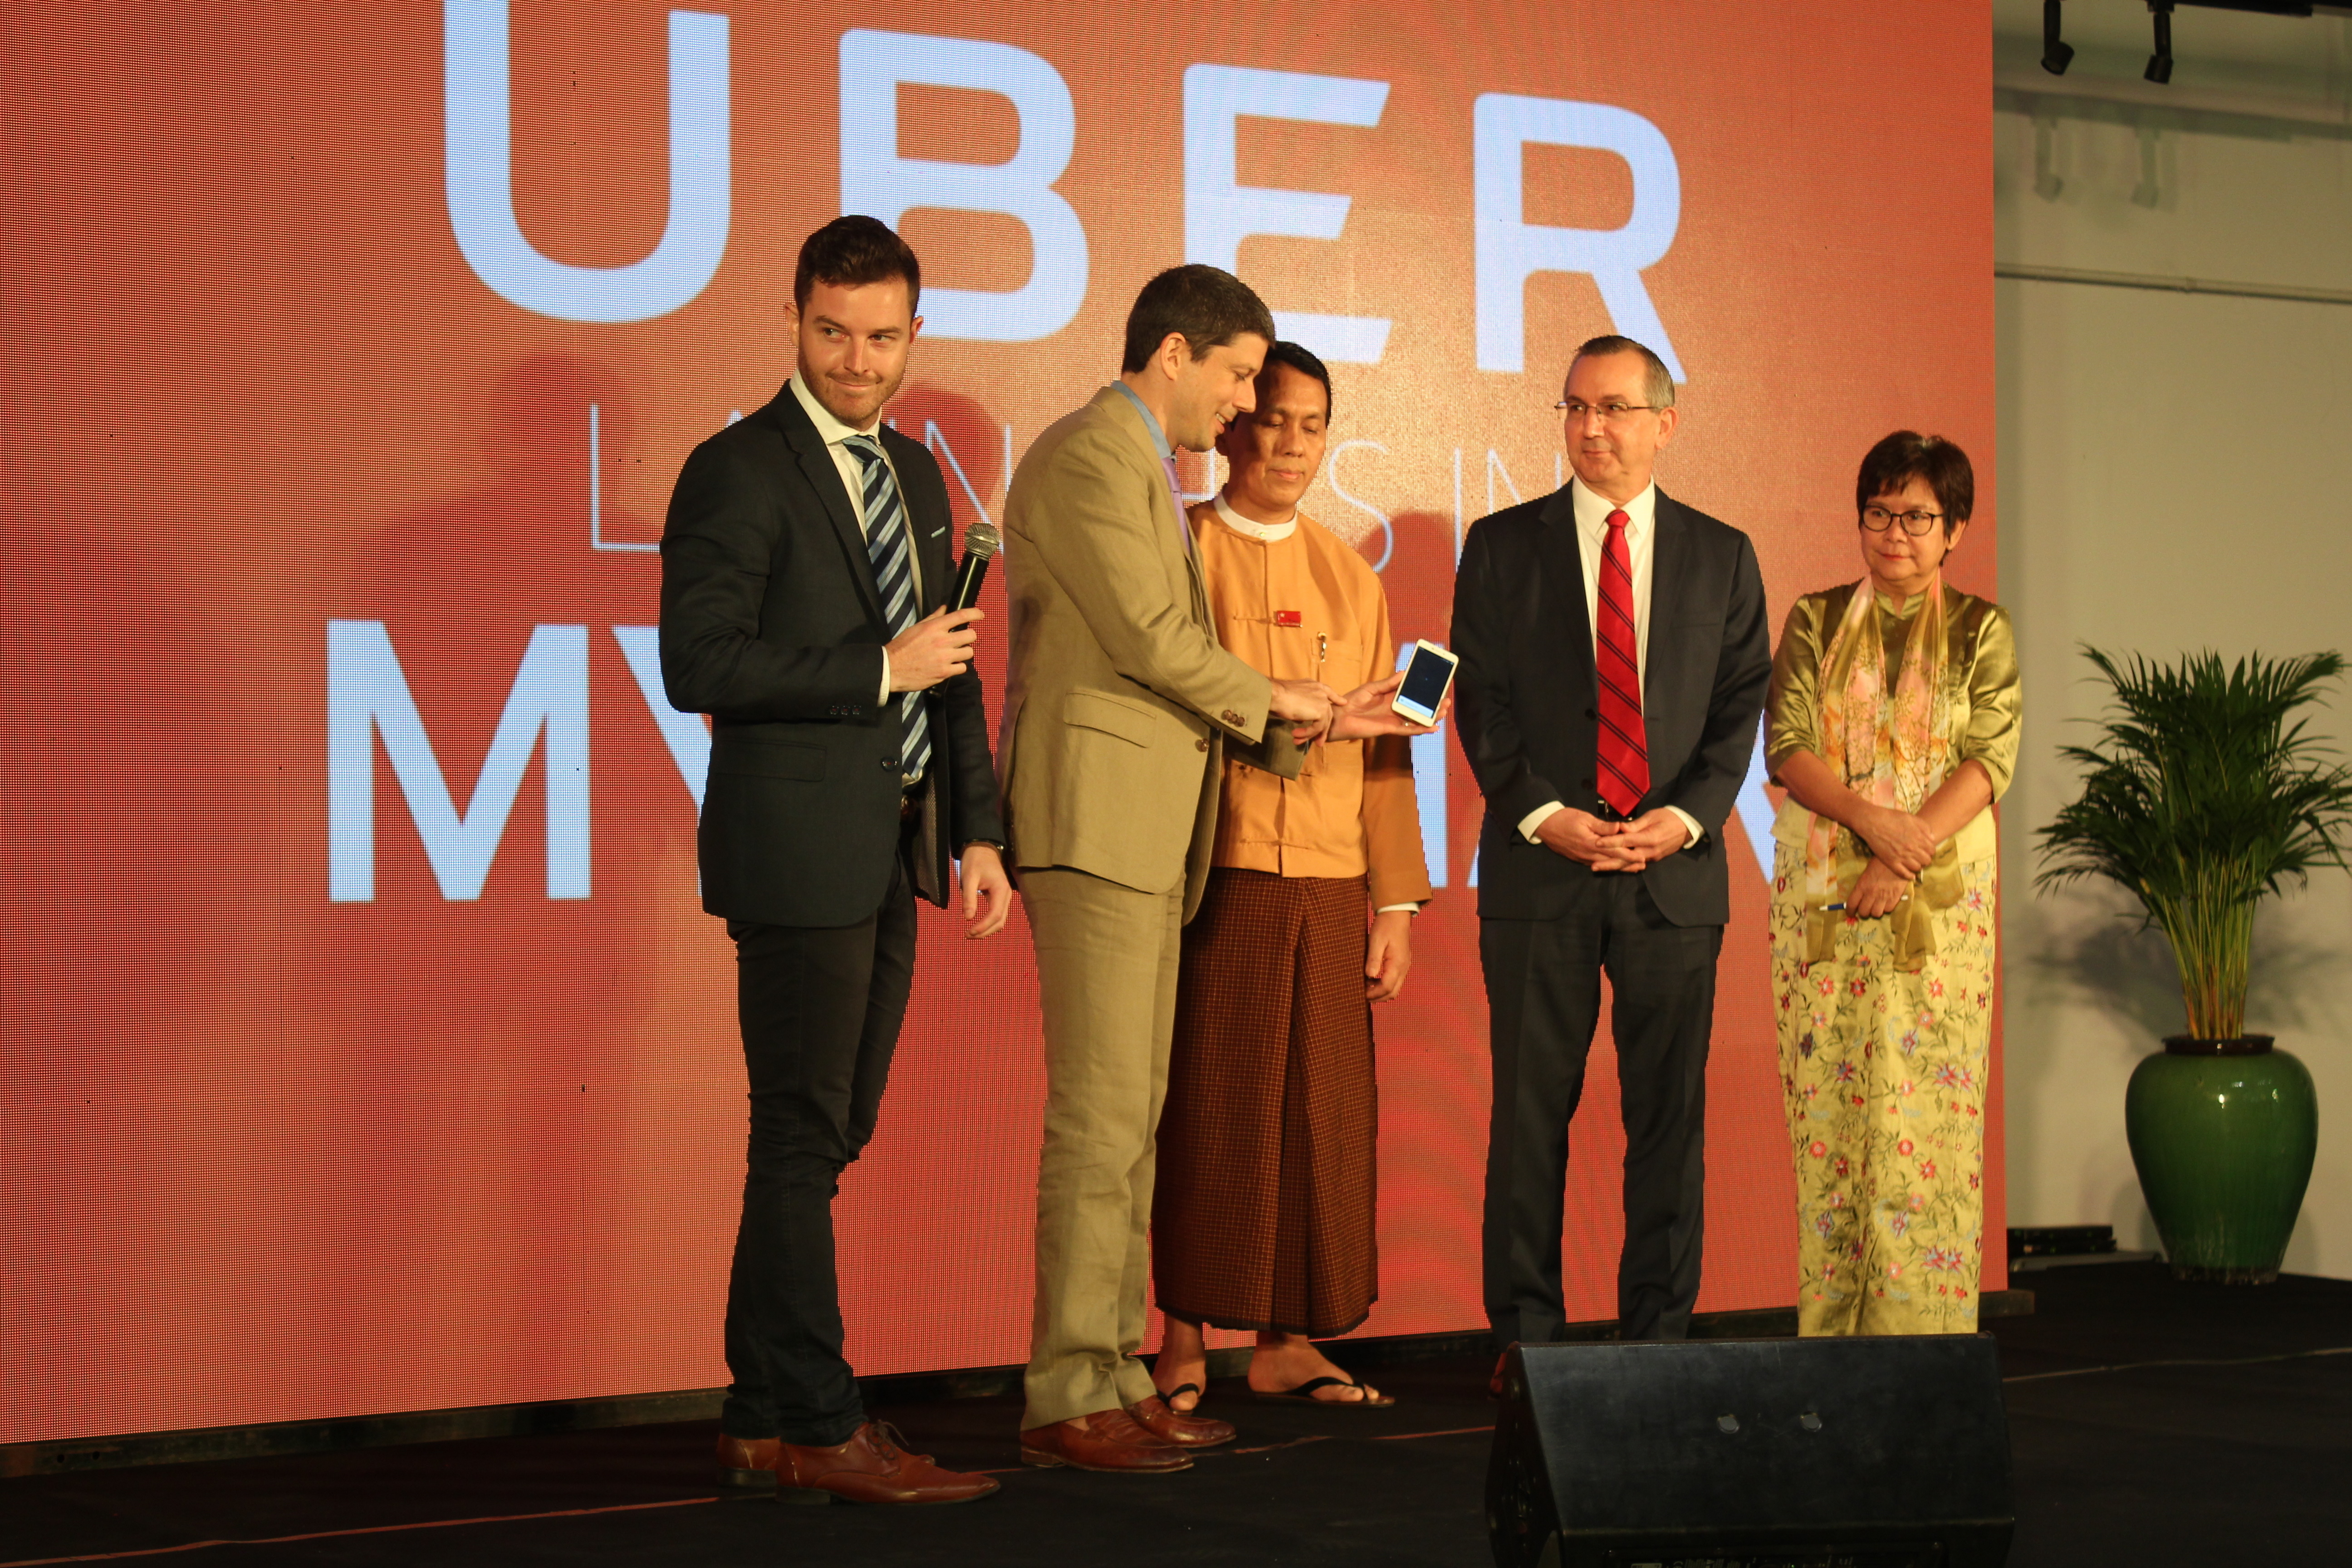 Yangon Region Chief Minister U Phyo Min Thein, US Ambassador Scot Marciel, and Yangon Region Minister for Transport and Communication Daw Nilar Kyaw appear on stage with Uber managers Mike Brown and Sam Bool on May 11, 2017. Photo: Jacob Goldberg